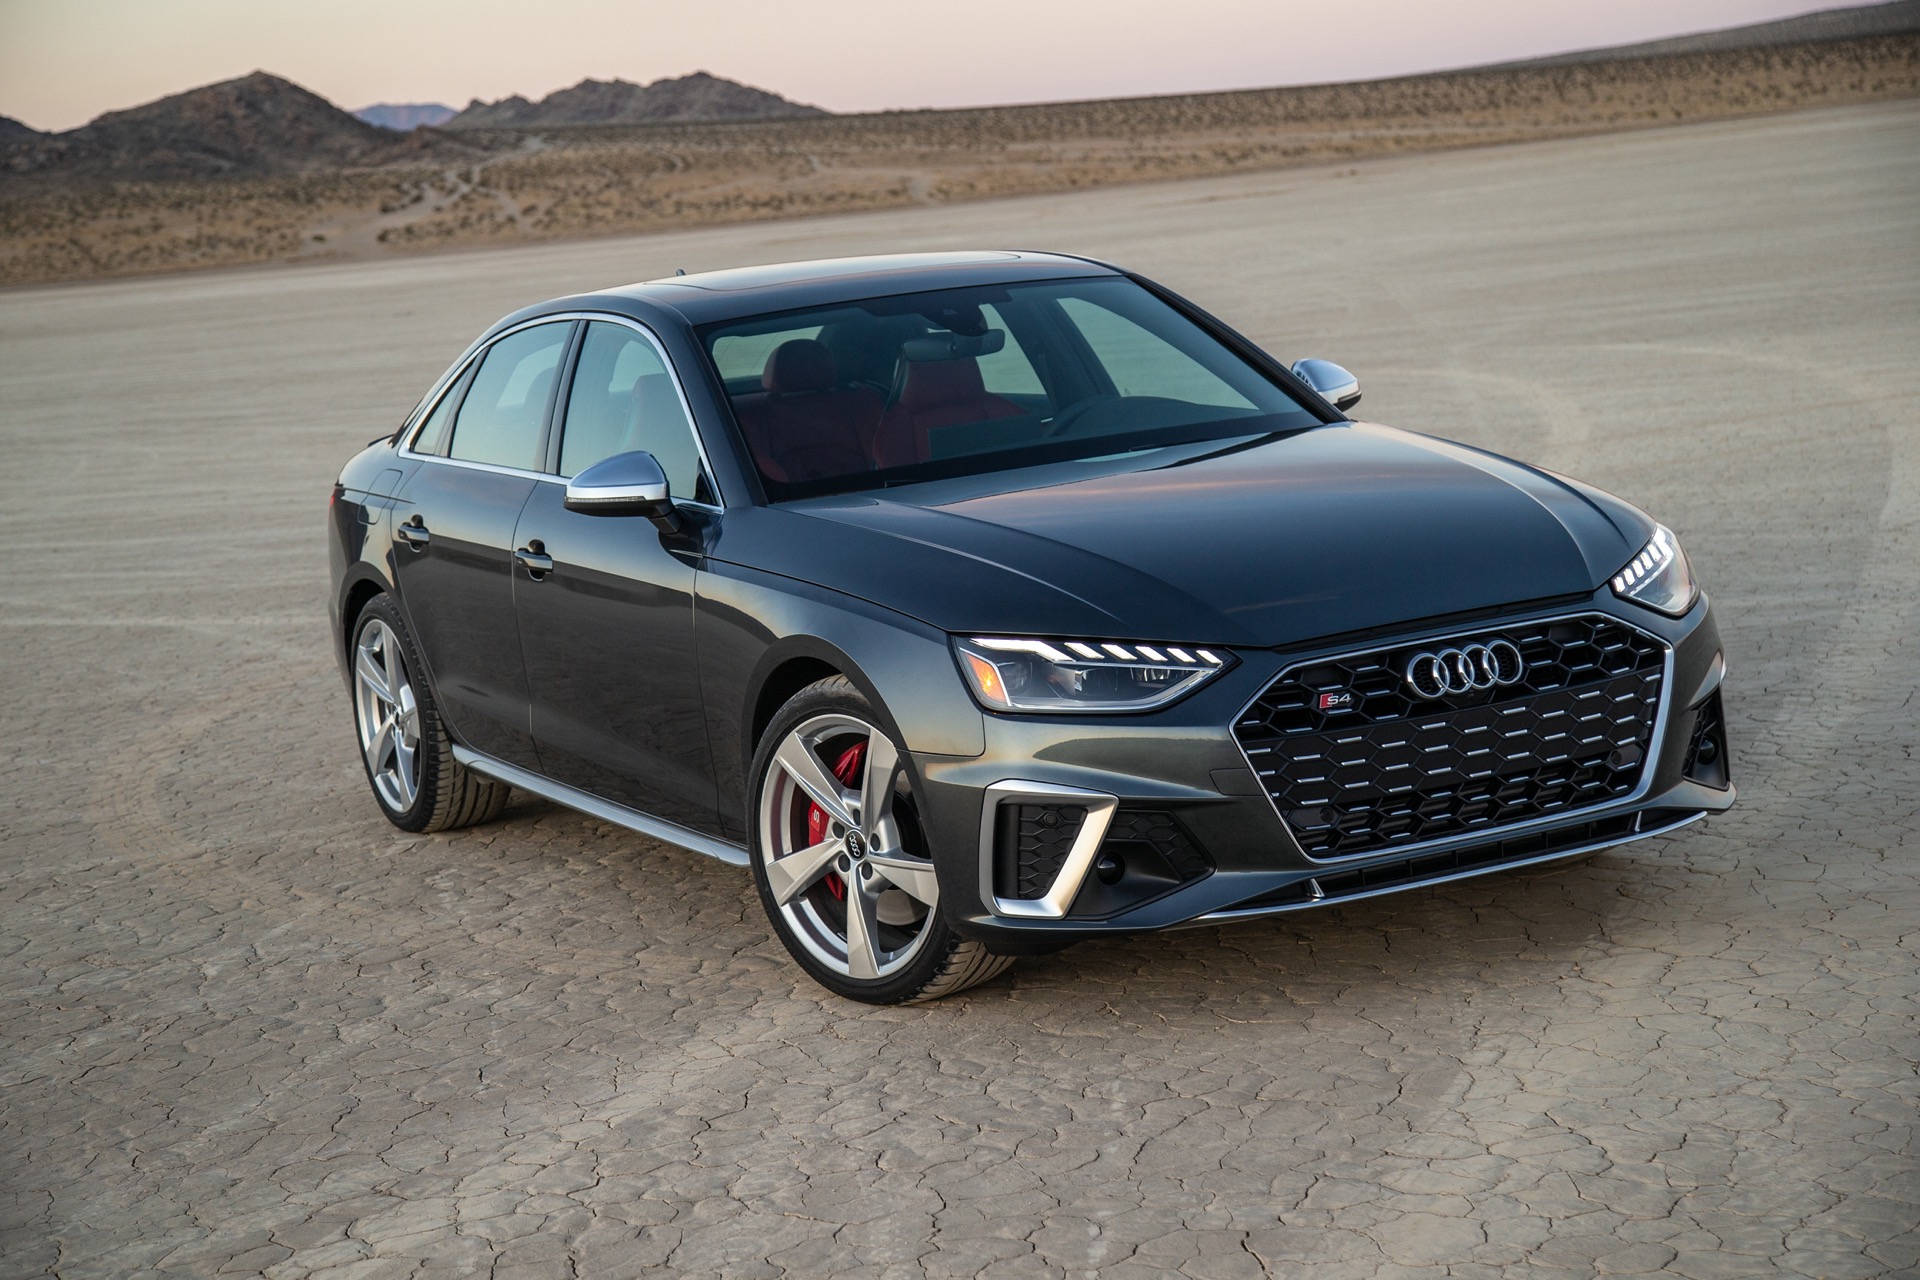 First drive review: 2020 Audi S4 outruns expectations